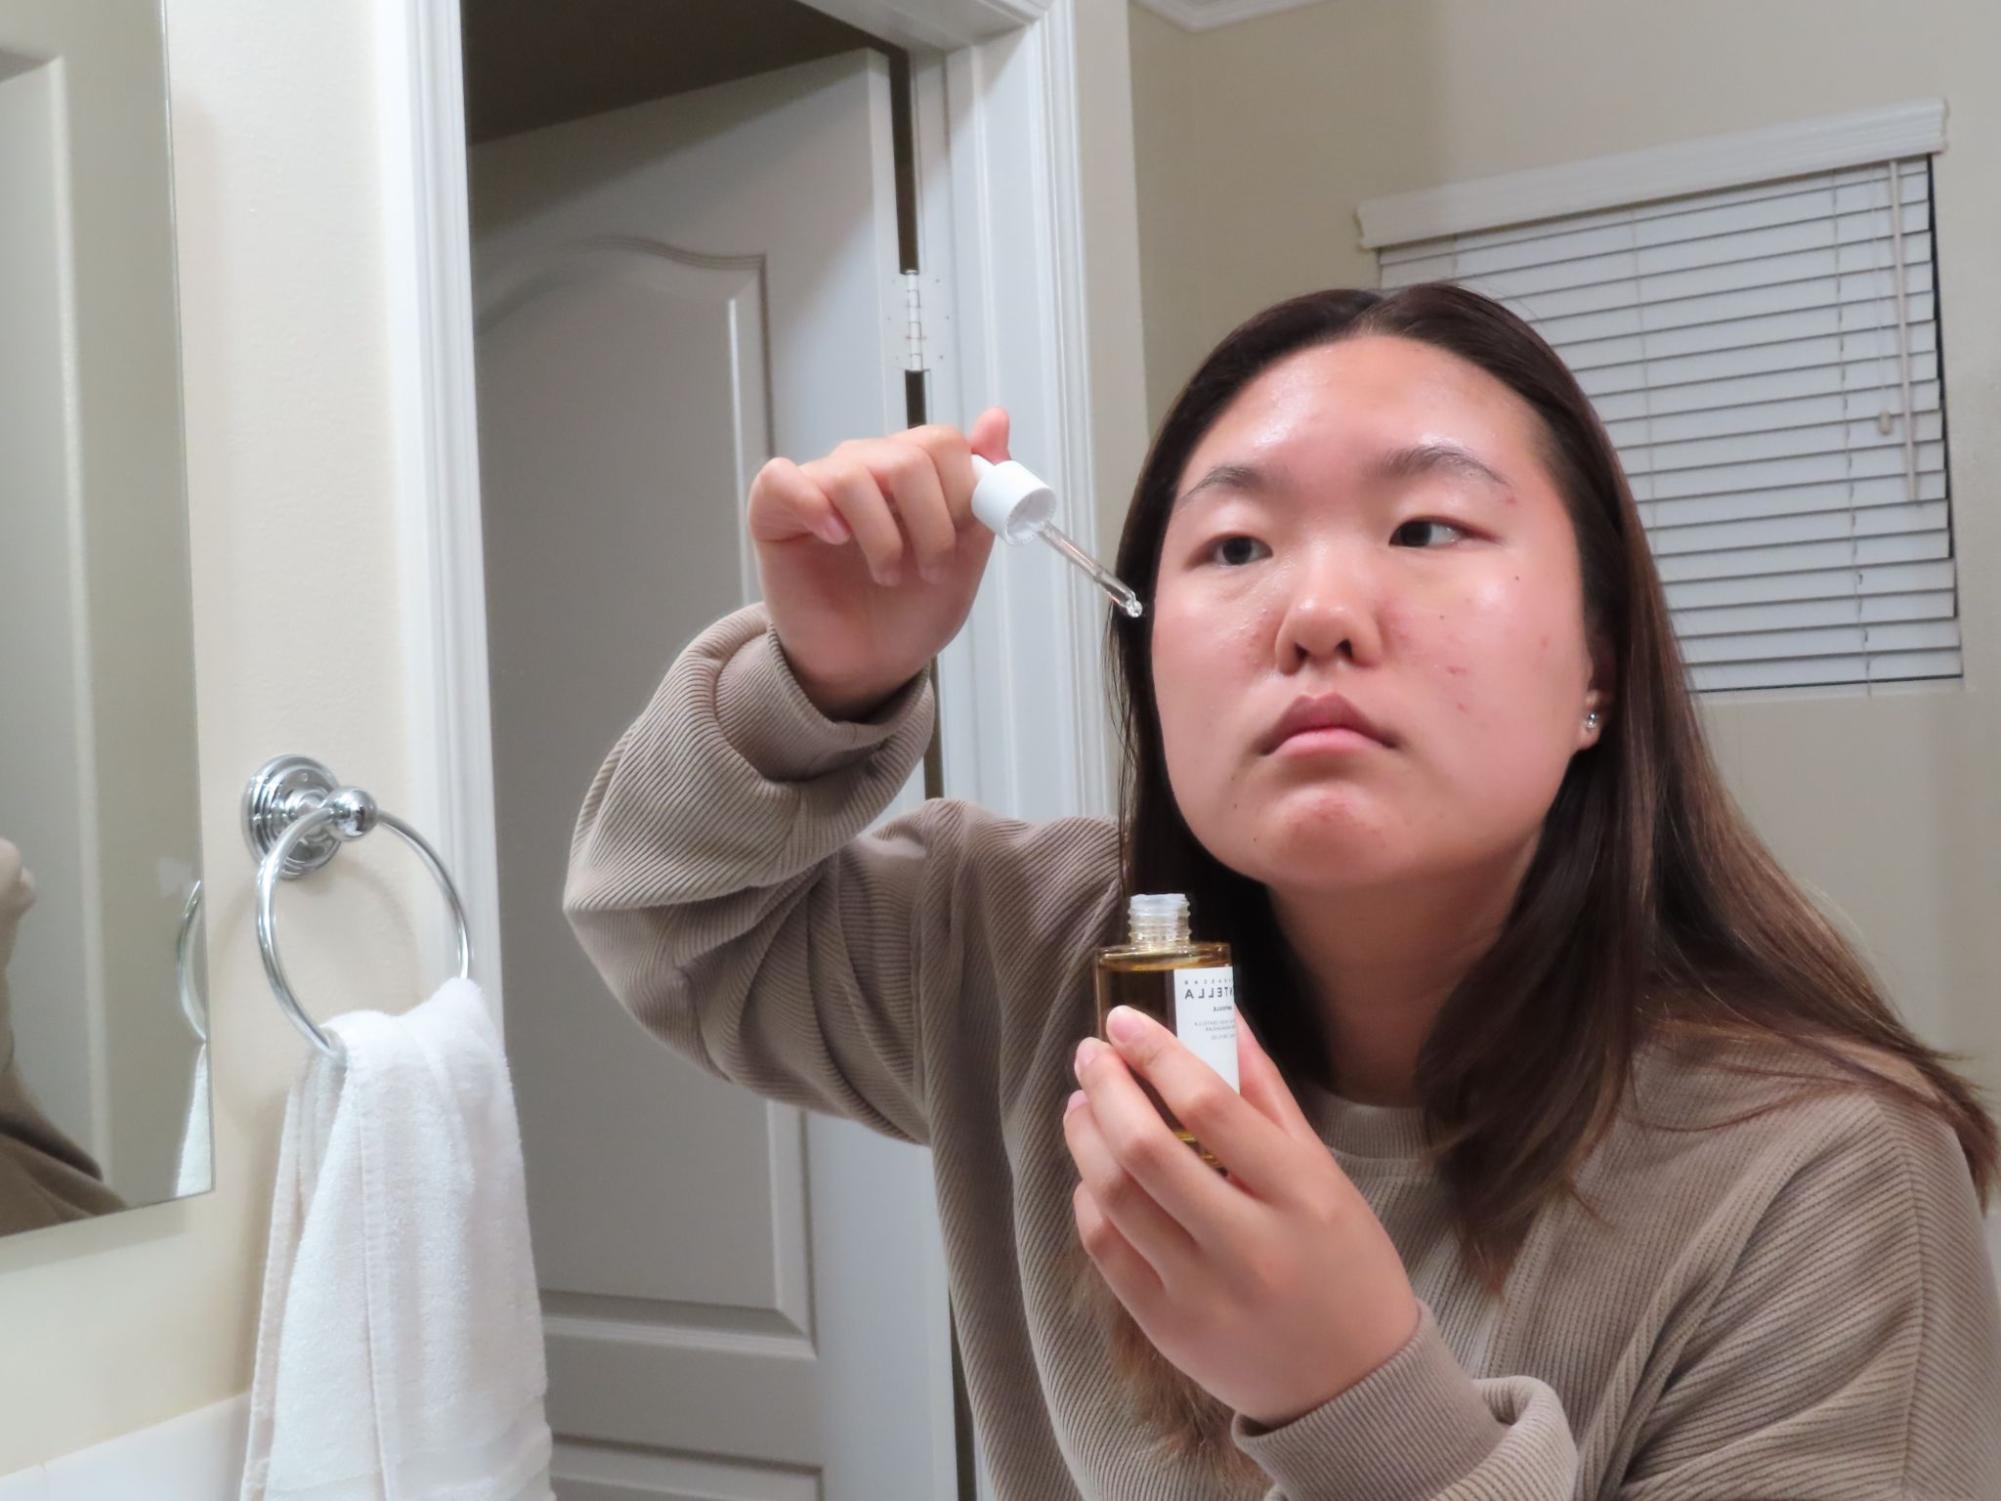 Accolade copy editor sophomore Nicole Park applies her newly bought skincare ampoule after being influenced to purchase it by various TikTok and Instagram influencers.